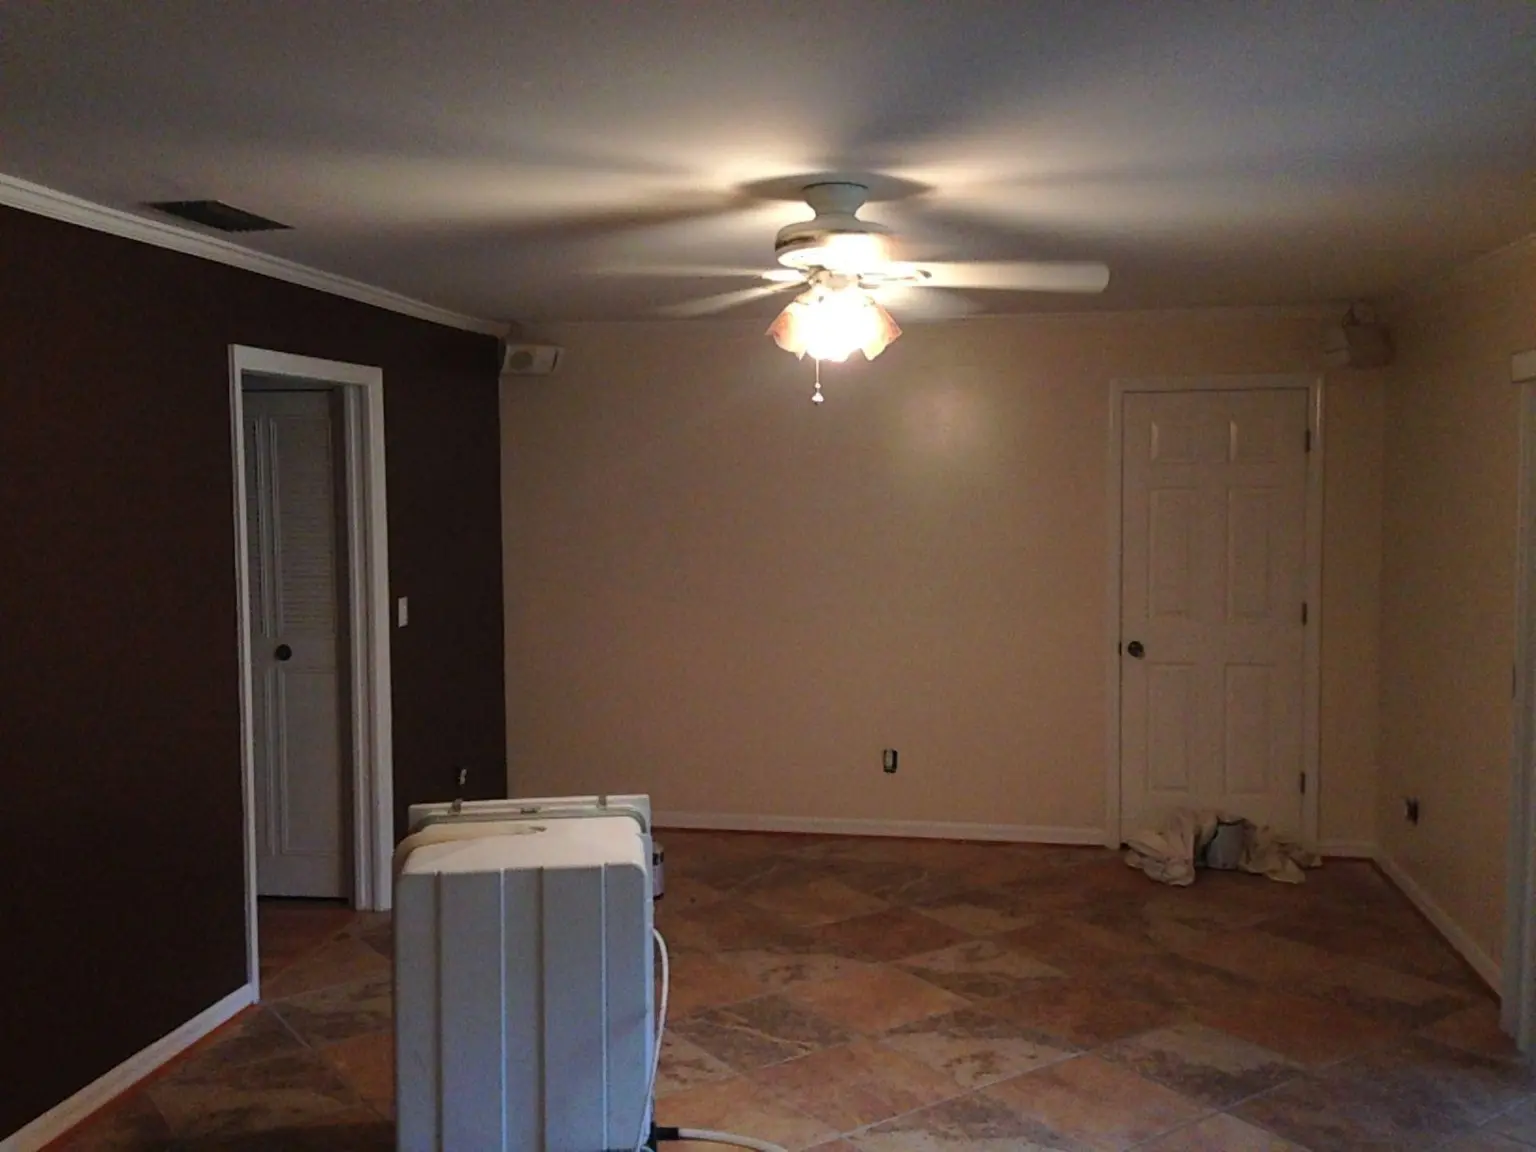 painting contractor Orlando before and after photo 22b